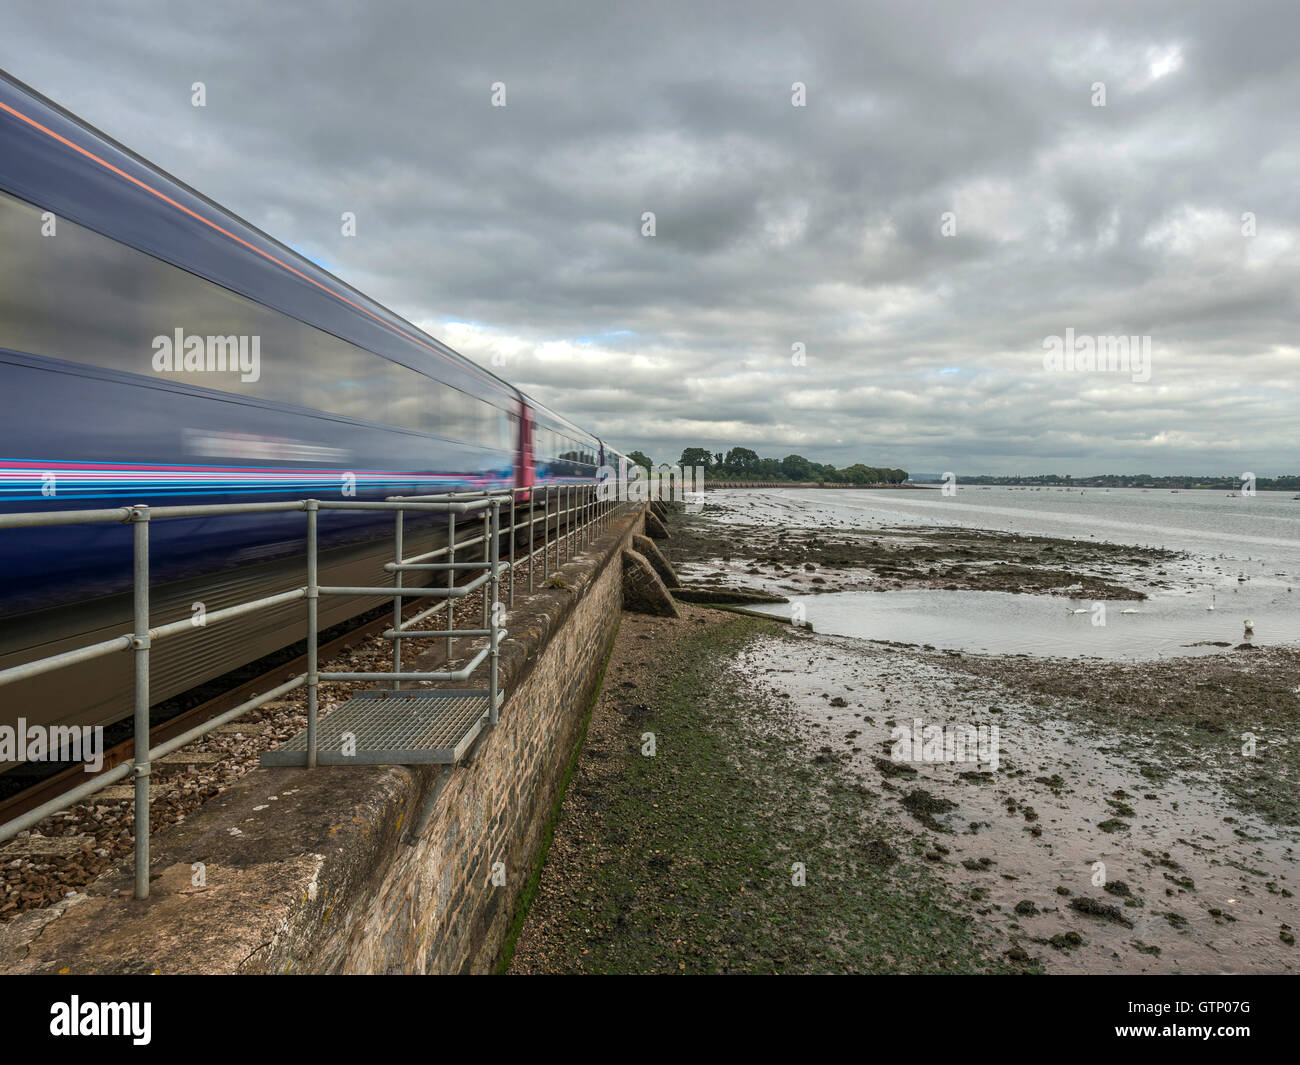 Landscape depicting picturesque First Great Western Riviera railway line along River Exe at Powderham, with passing train. Stock Photo